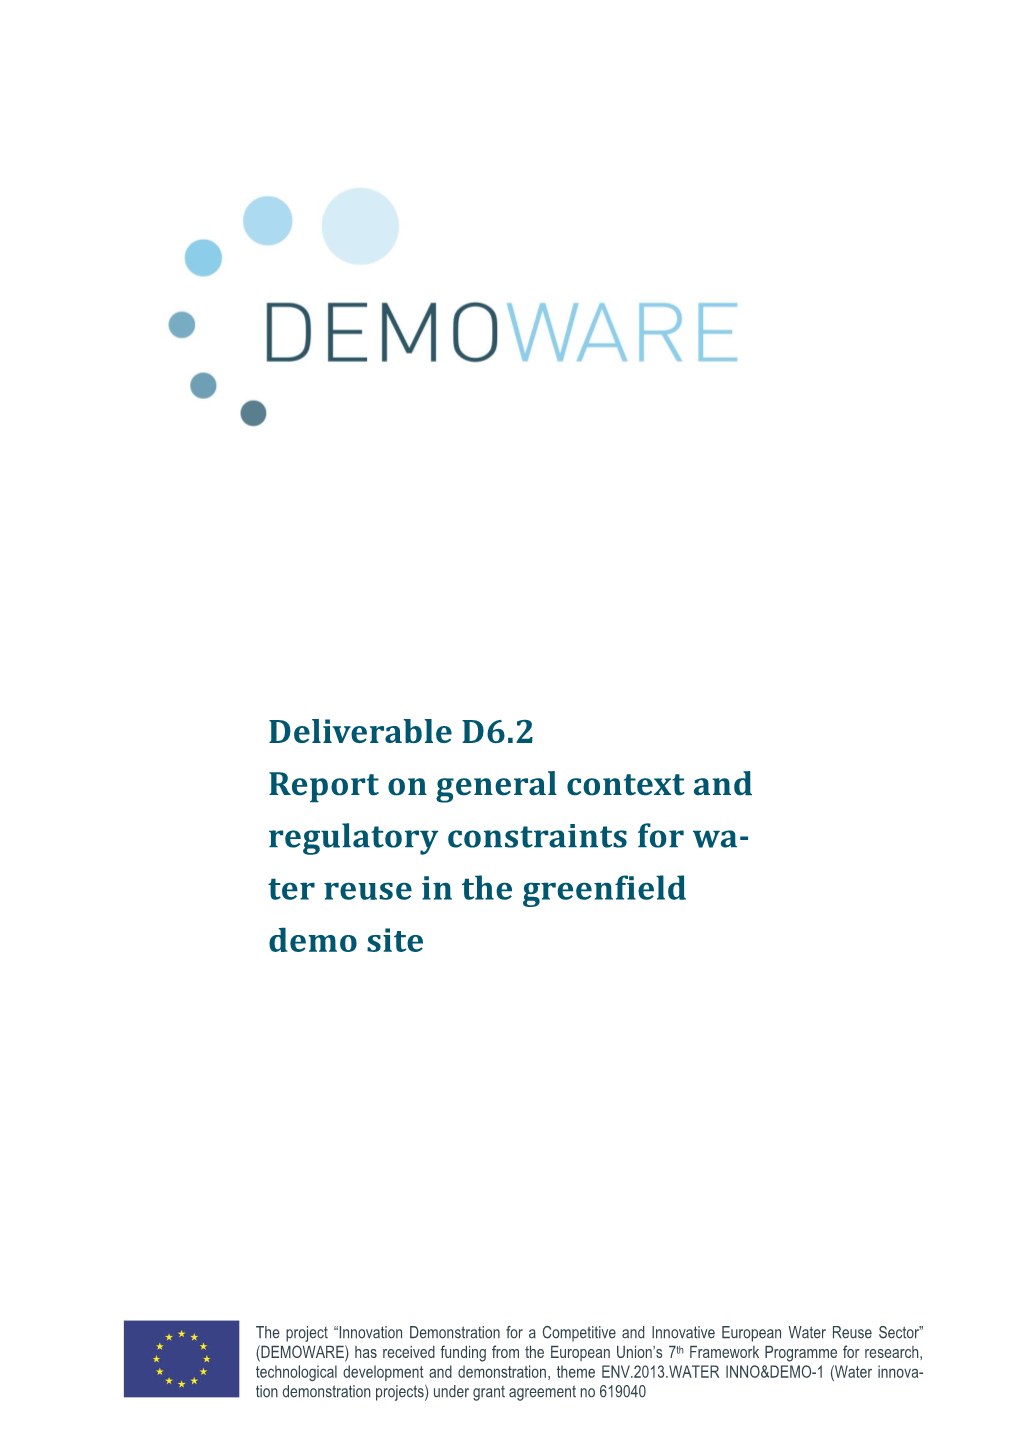 Deliverable D6.2 Report on General Context and Regulatory Constraints for Wa- Ter Reuse in the Greenfield Demo Site